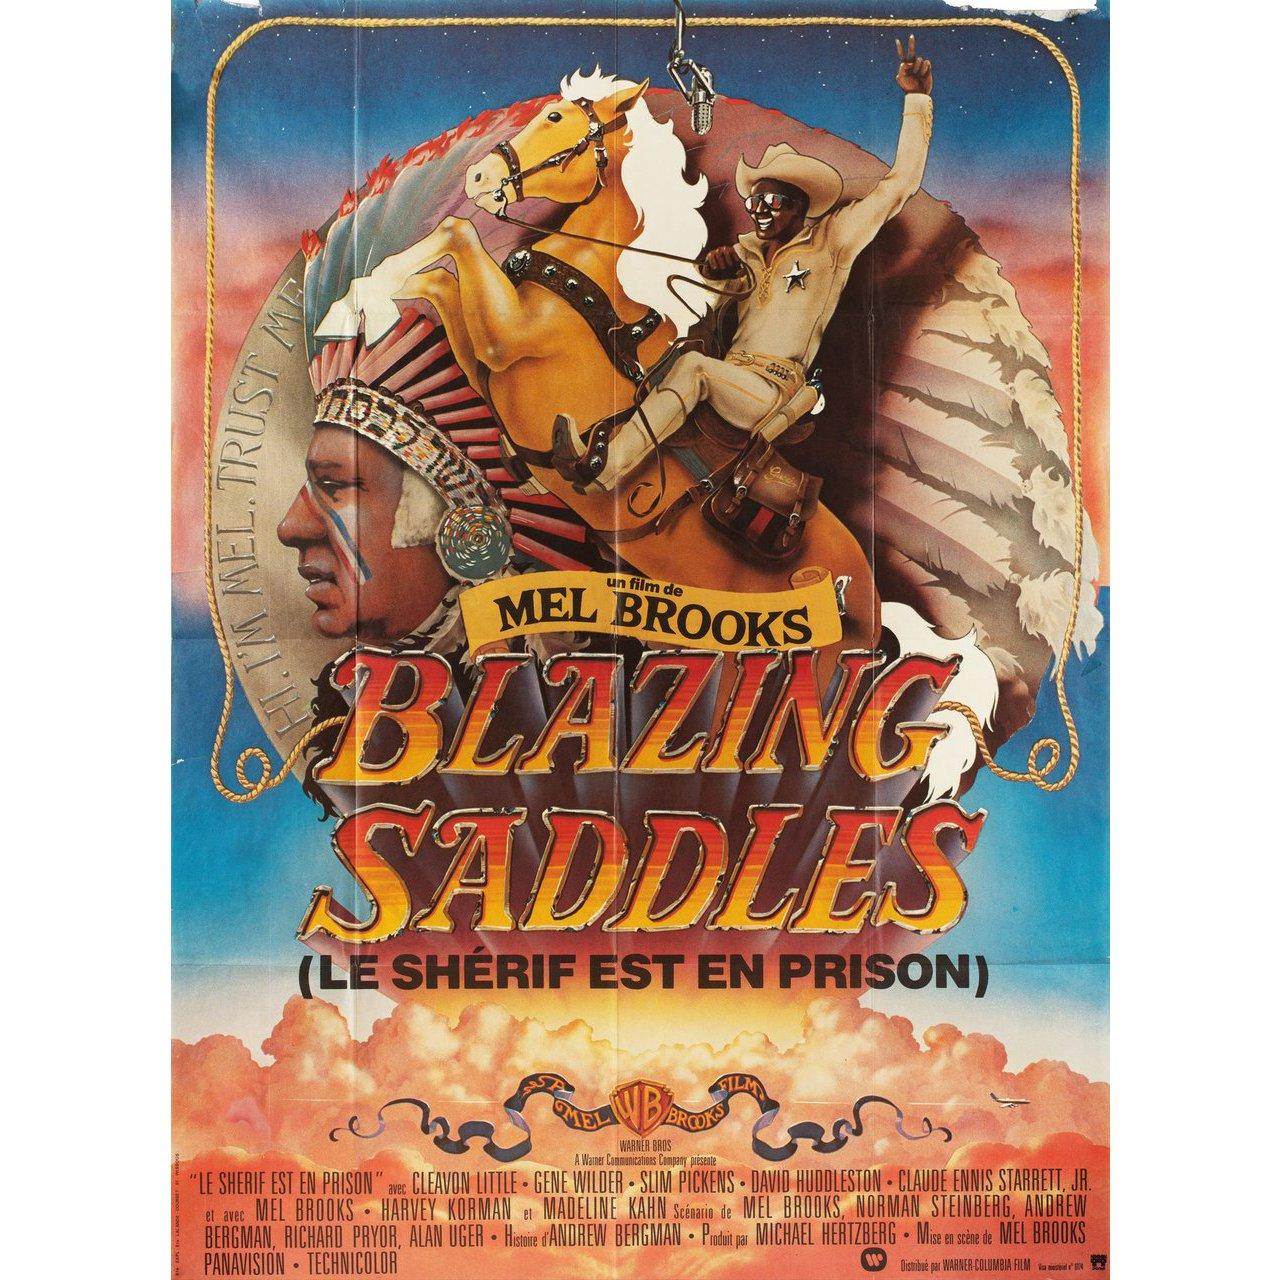 Original 1975 French grande poster by John Alvin / Anthony Goldschmidt for the first French theatrical release of the film Blazing Saddles directed by Mel Brooks with Cleavon Little / Gene Wilder / Slim Pickens / Harvey Korman. Good-Very Good